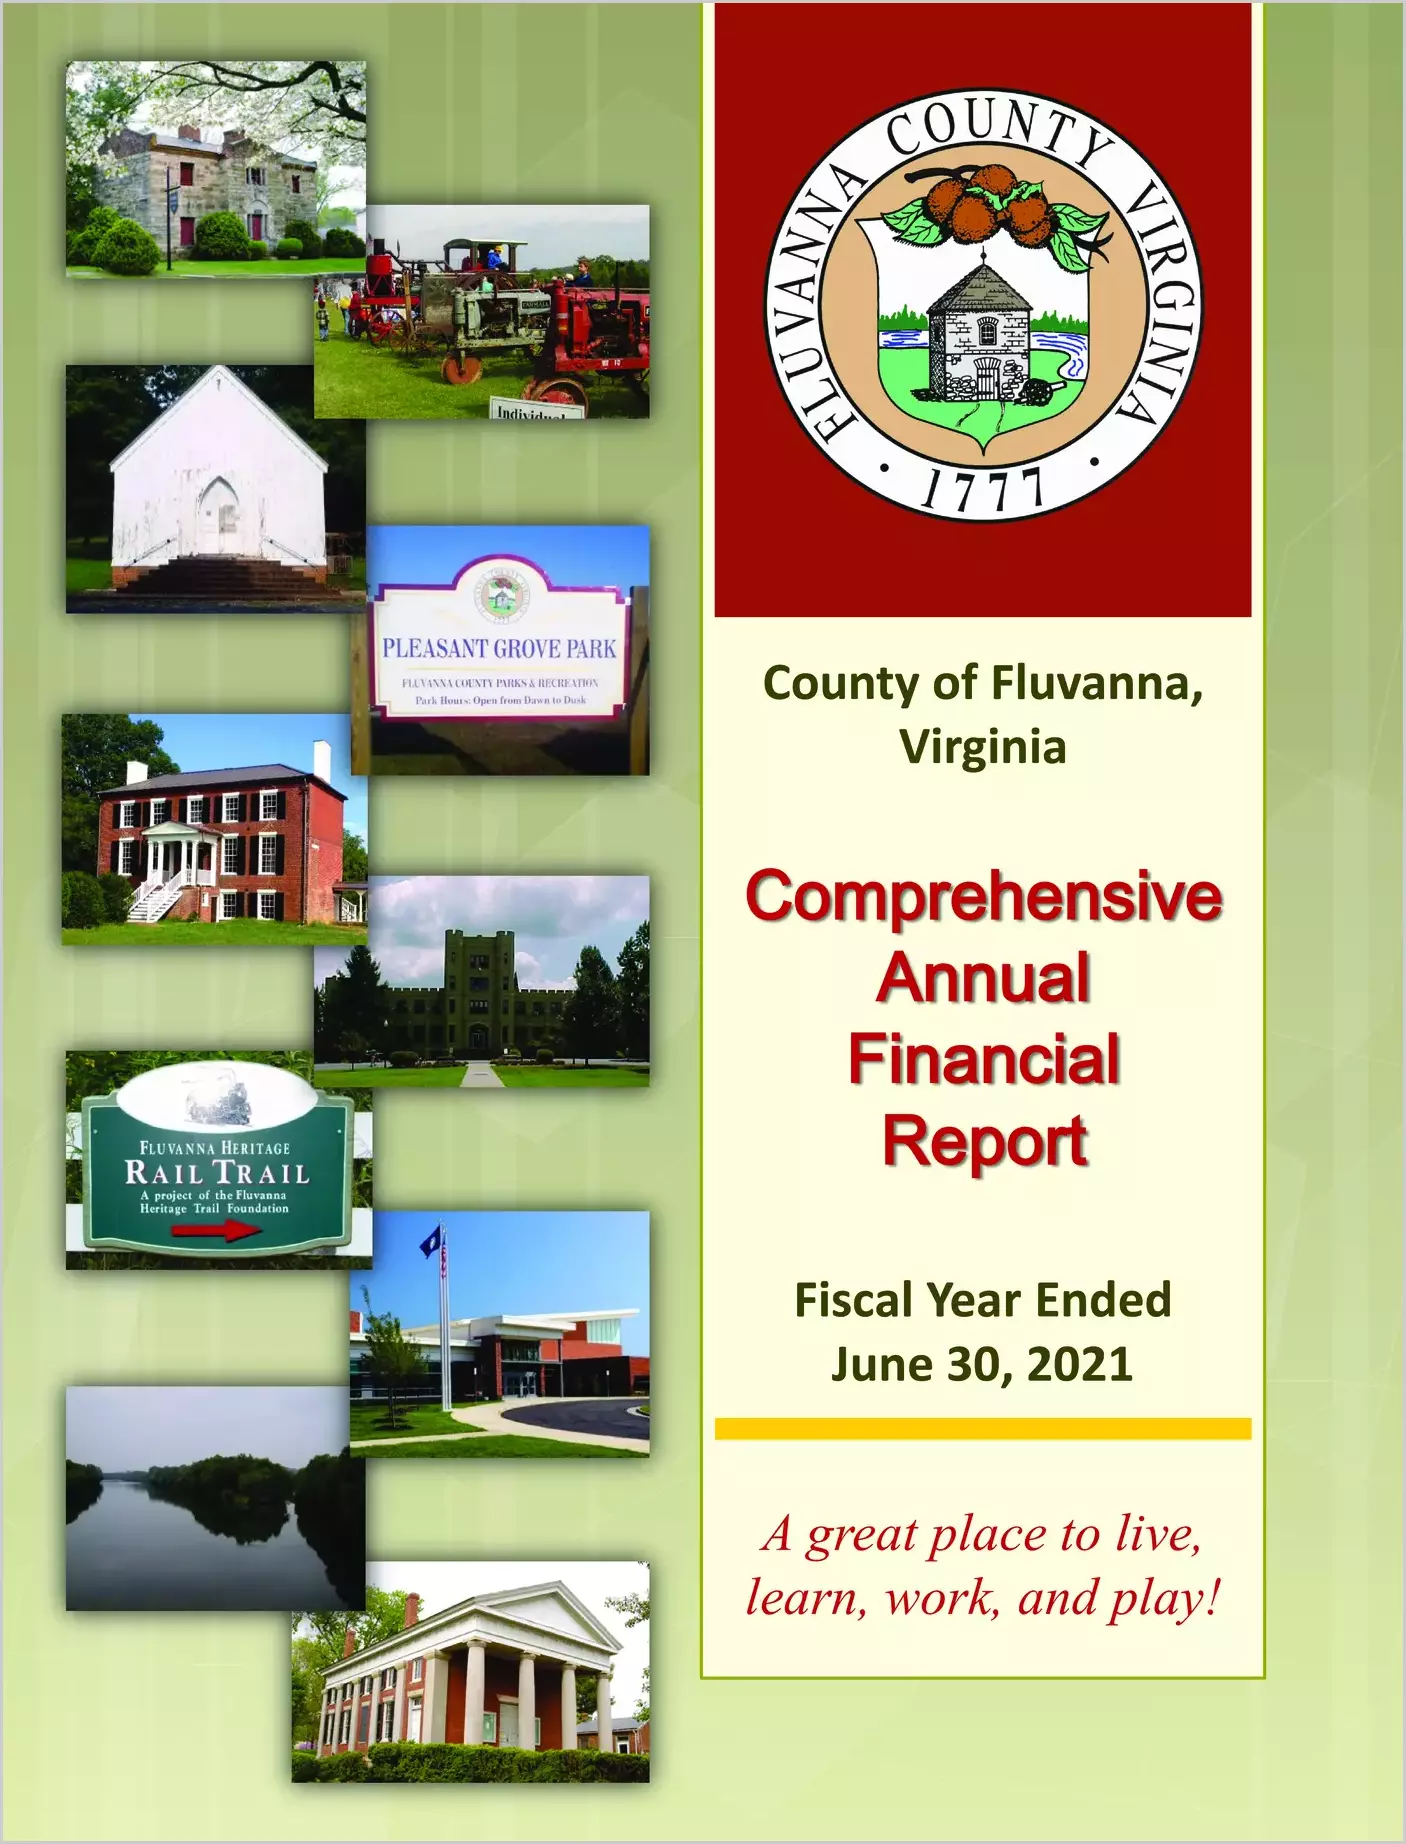 2021 Annual Financial Report for County of Fluvanna